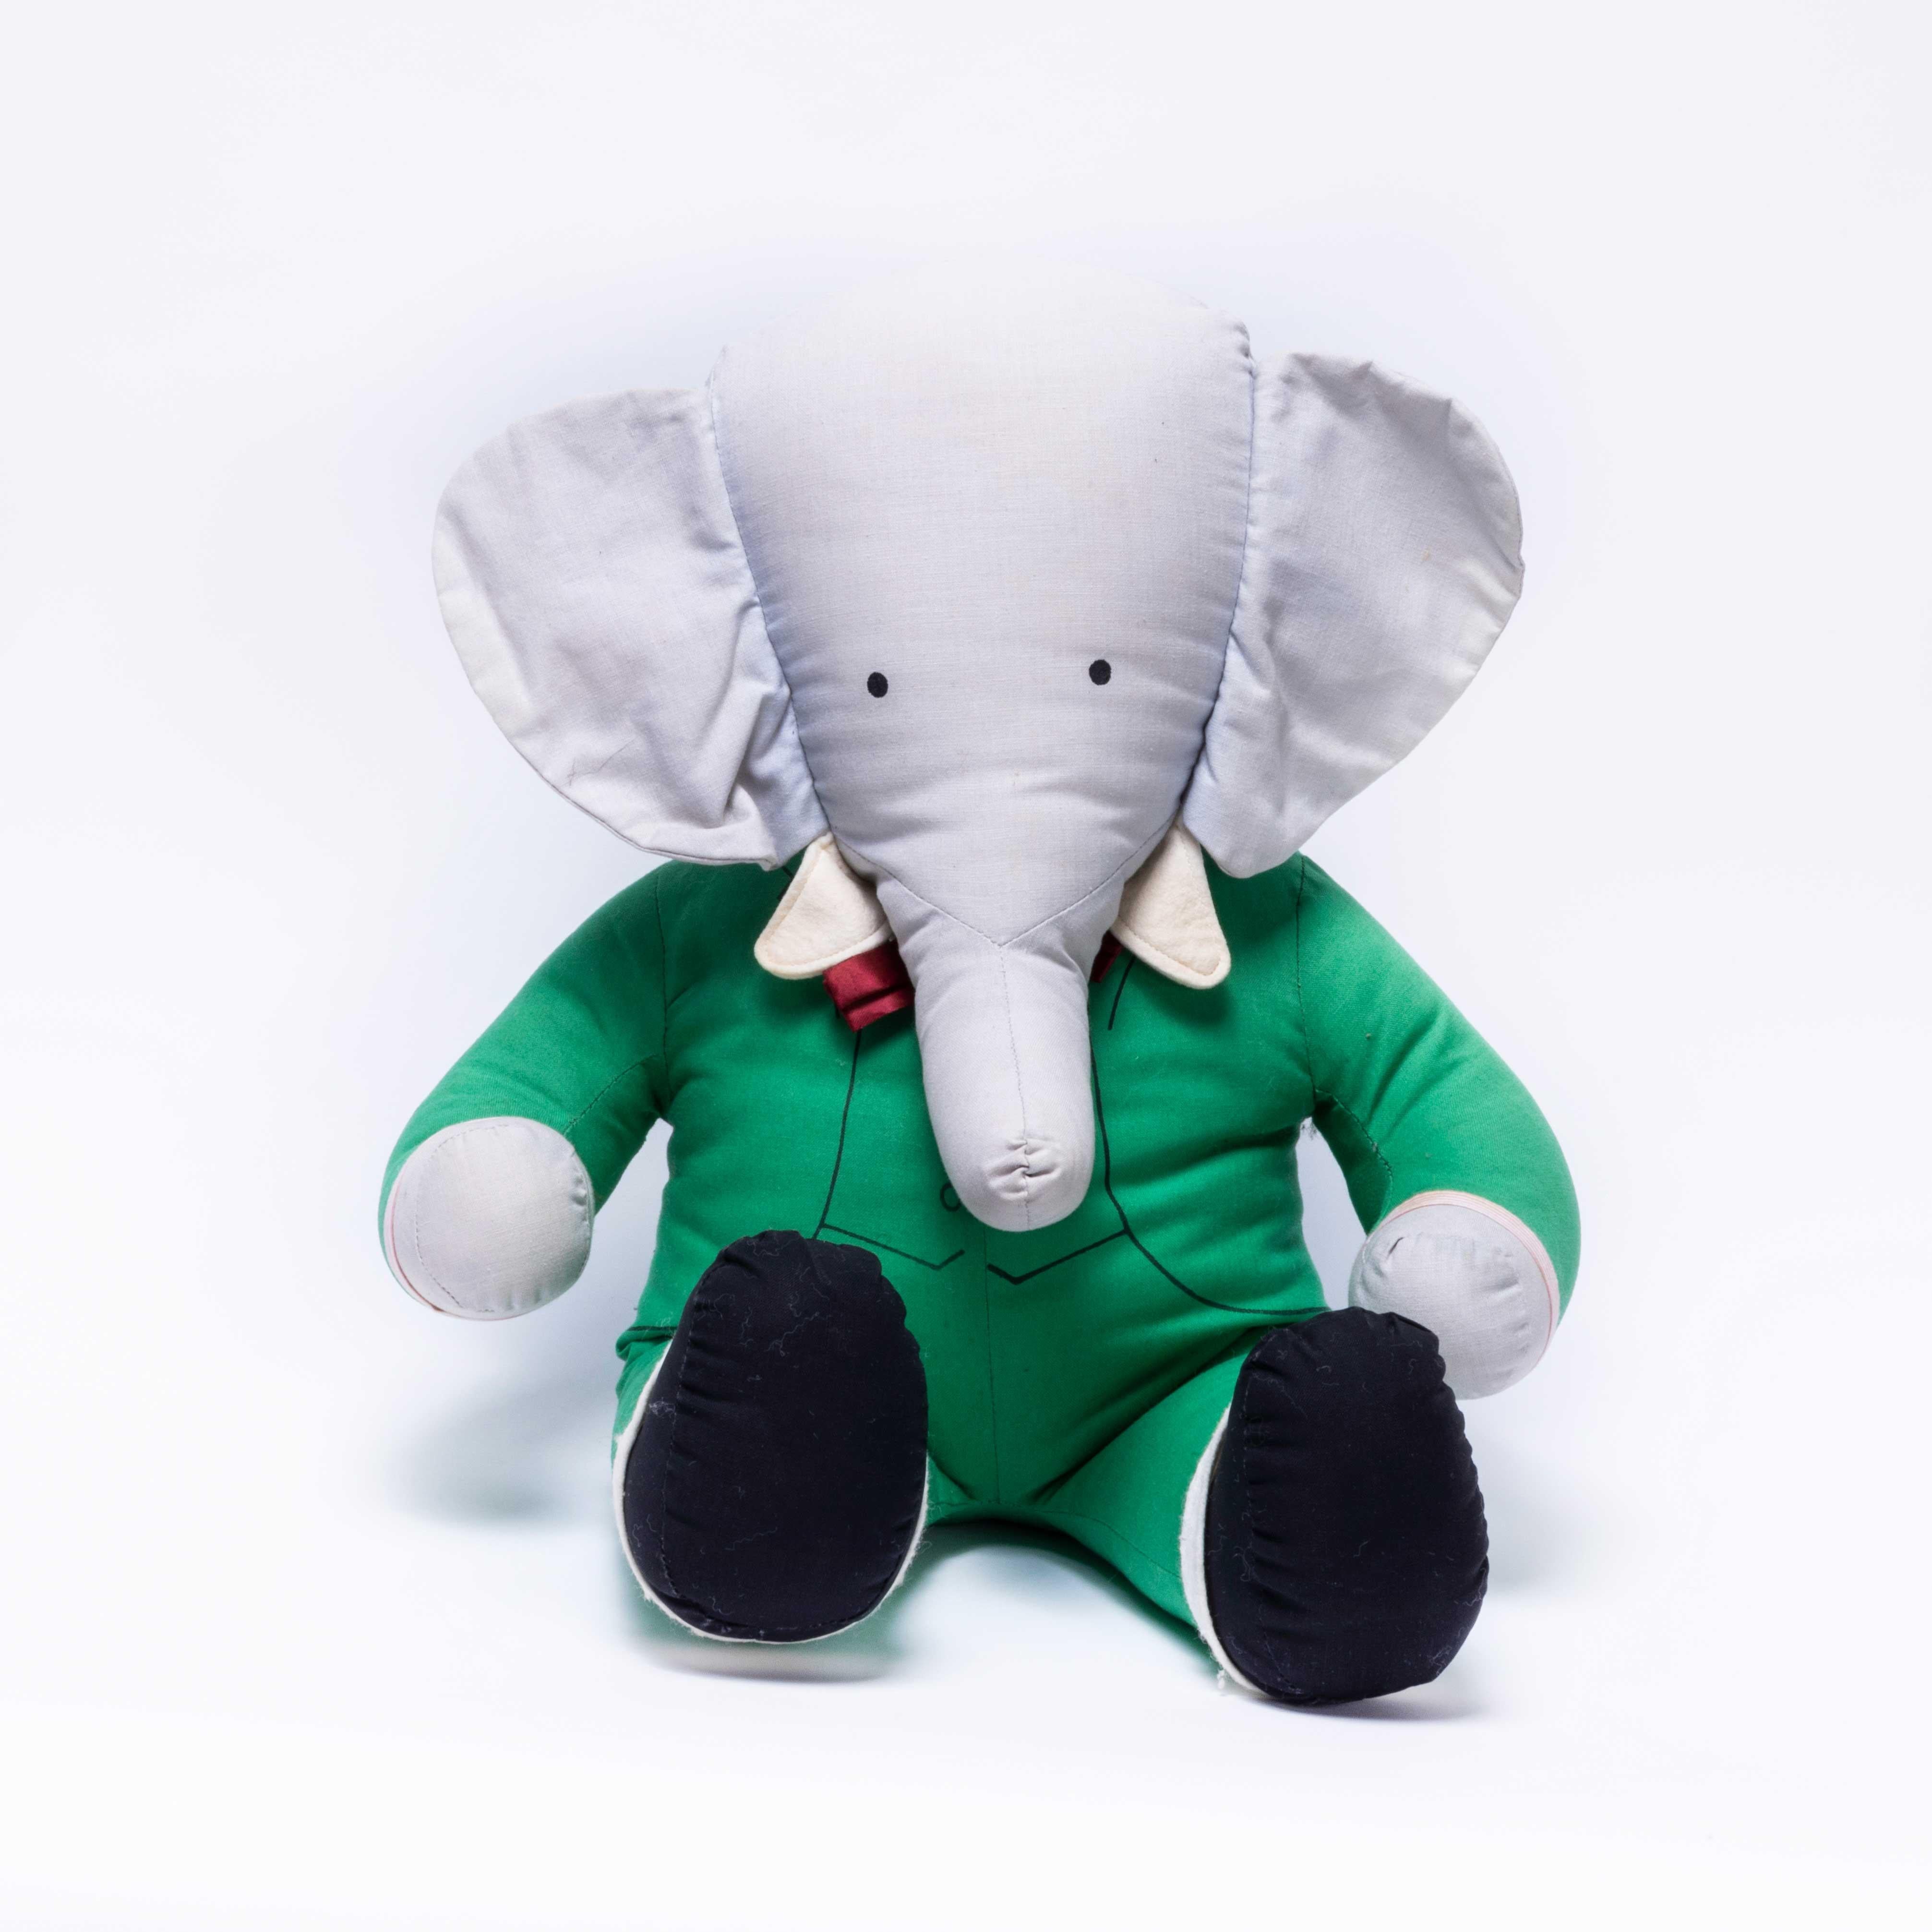 1950’s large original vintage babar soft elephant
1950’s large original vintage babar soft elephant. Babar the Elephant is an elephant character who first appeared in 1931 in the French children’s book Histoire de Babar by Jean de Brunhoff. This is